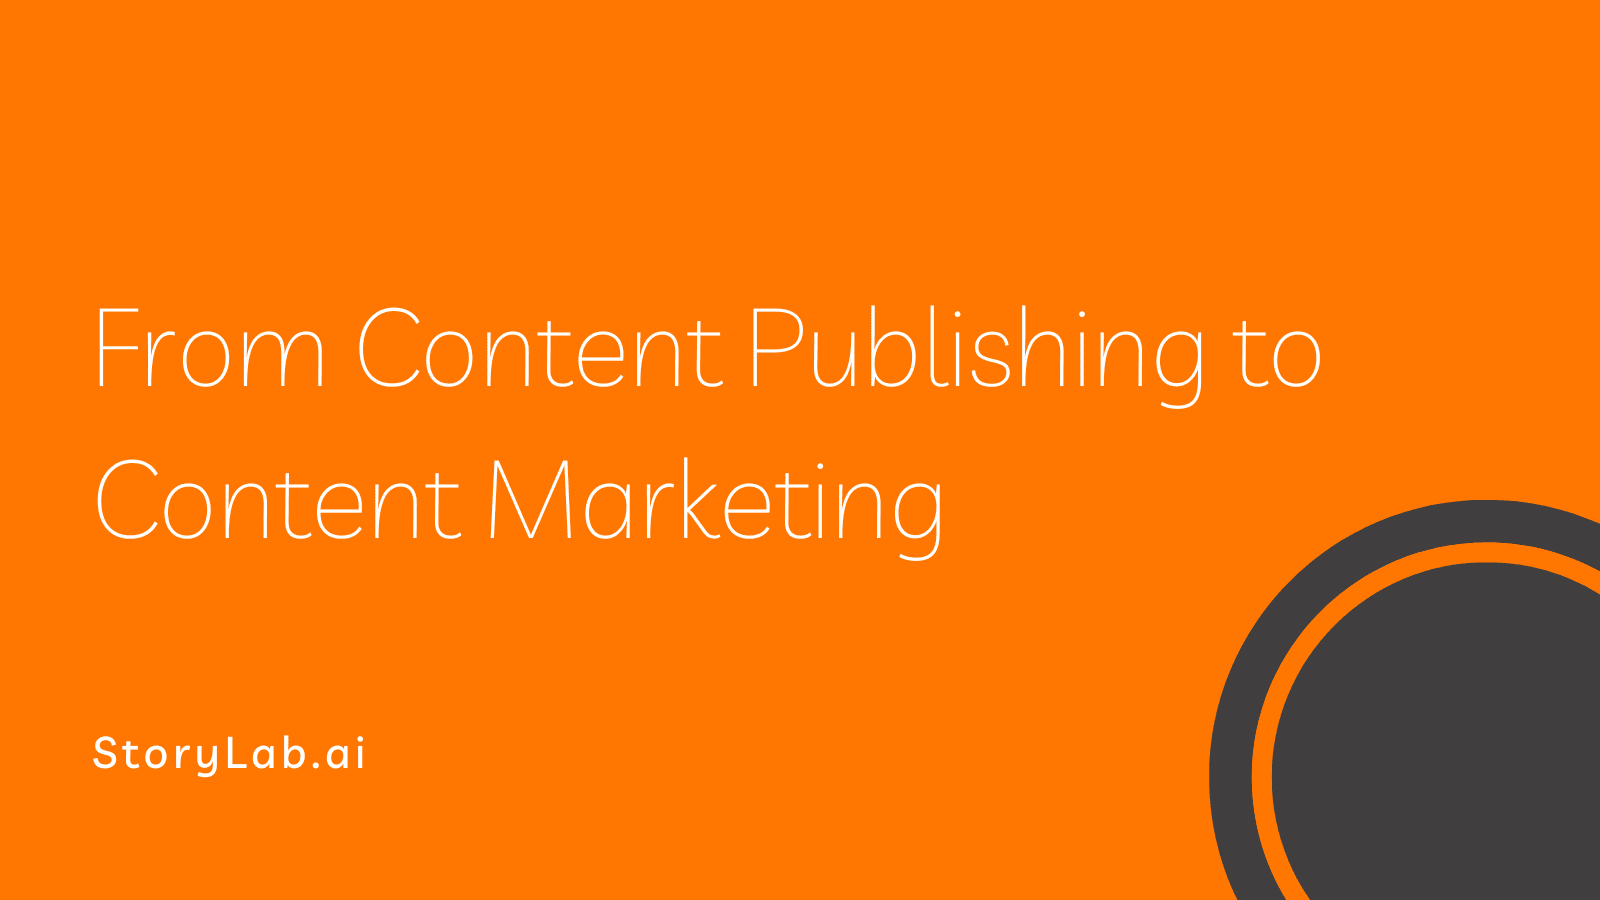 From Content Publishing to Content Marketing